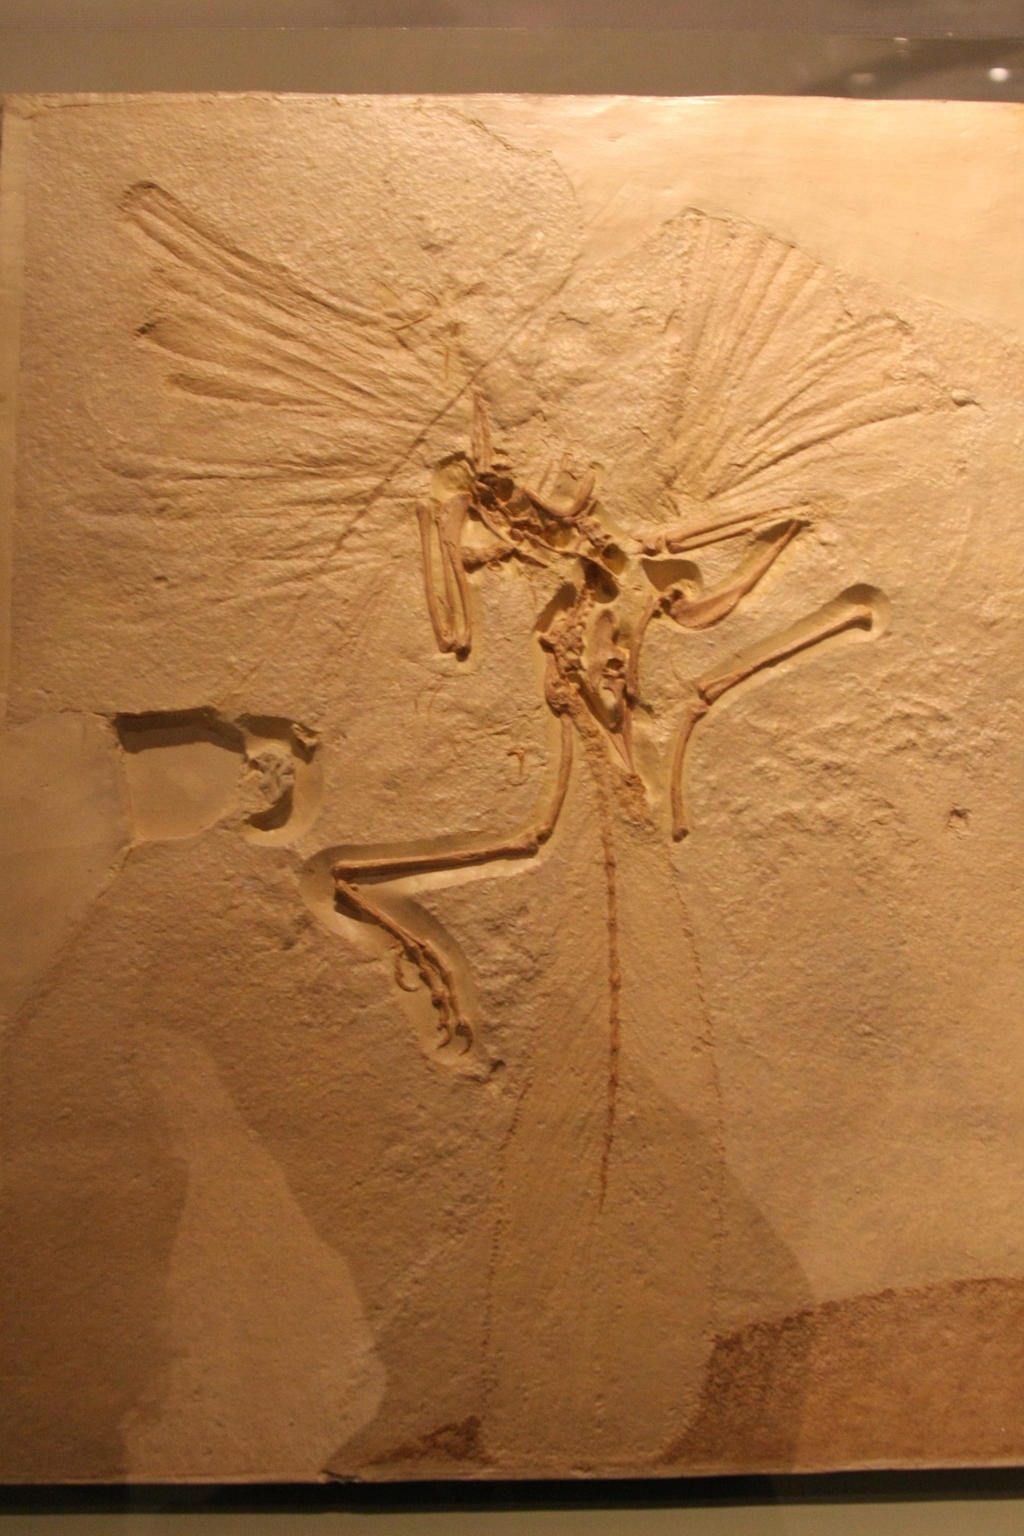 Archaeopteryx at the Chicago Field Museum